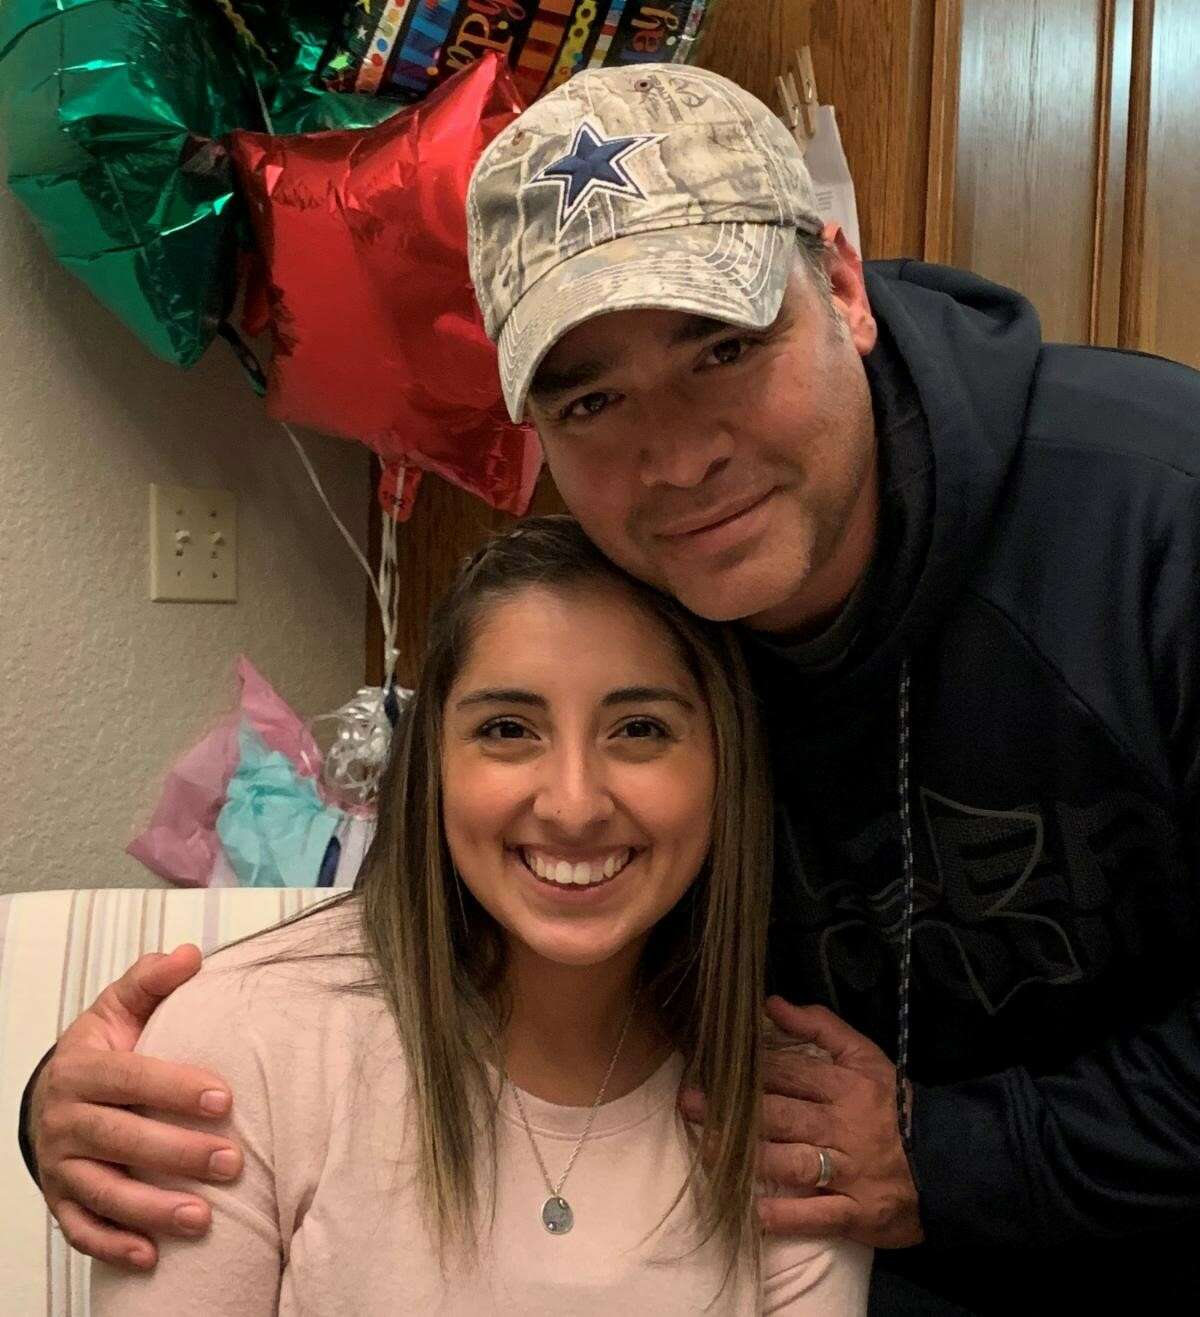 Texas A&M University-San Antonio student, Brenda Johnson, is pictured with her father Adolph "T.J." Mendez, who became Comal County's first death attributed to COVID-19, according to university and county officials.